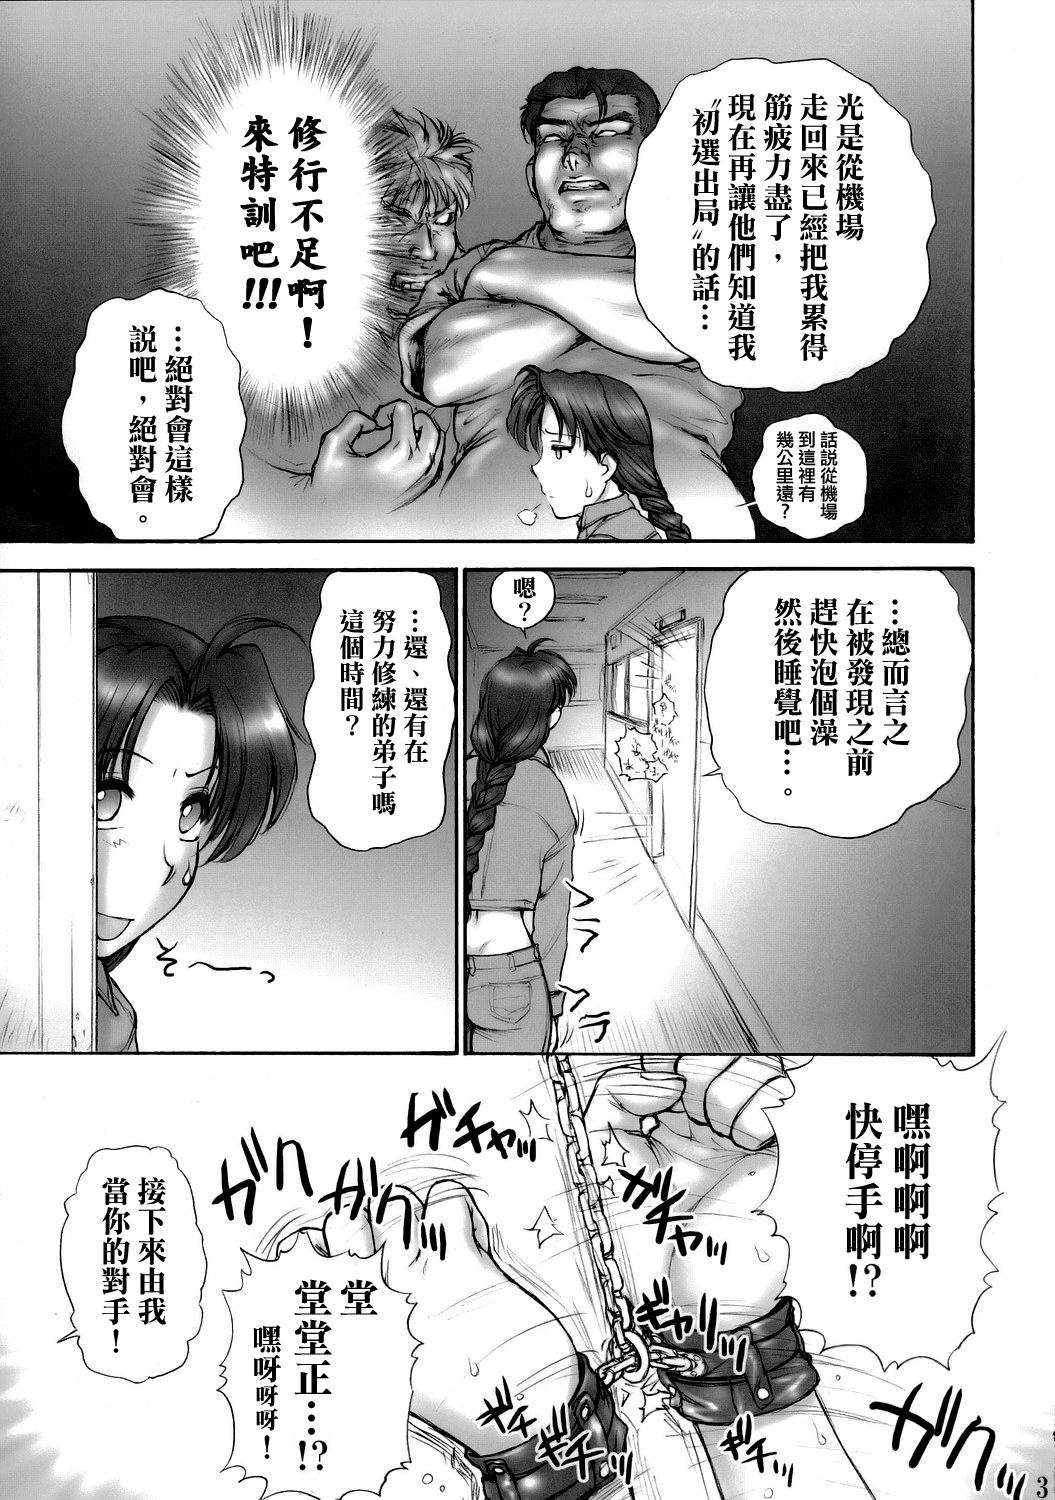 Natural Boobs (SC29) [Shinnihon Pepsitou (St. Germain-sal)] Report Concerning Kyoku-gen-ryuu (The King of Fighters) [Chinese] [日祈漢化] - King of fighters Students - Page 5